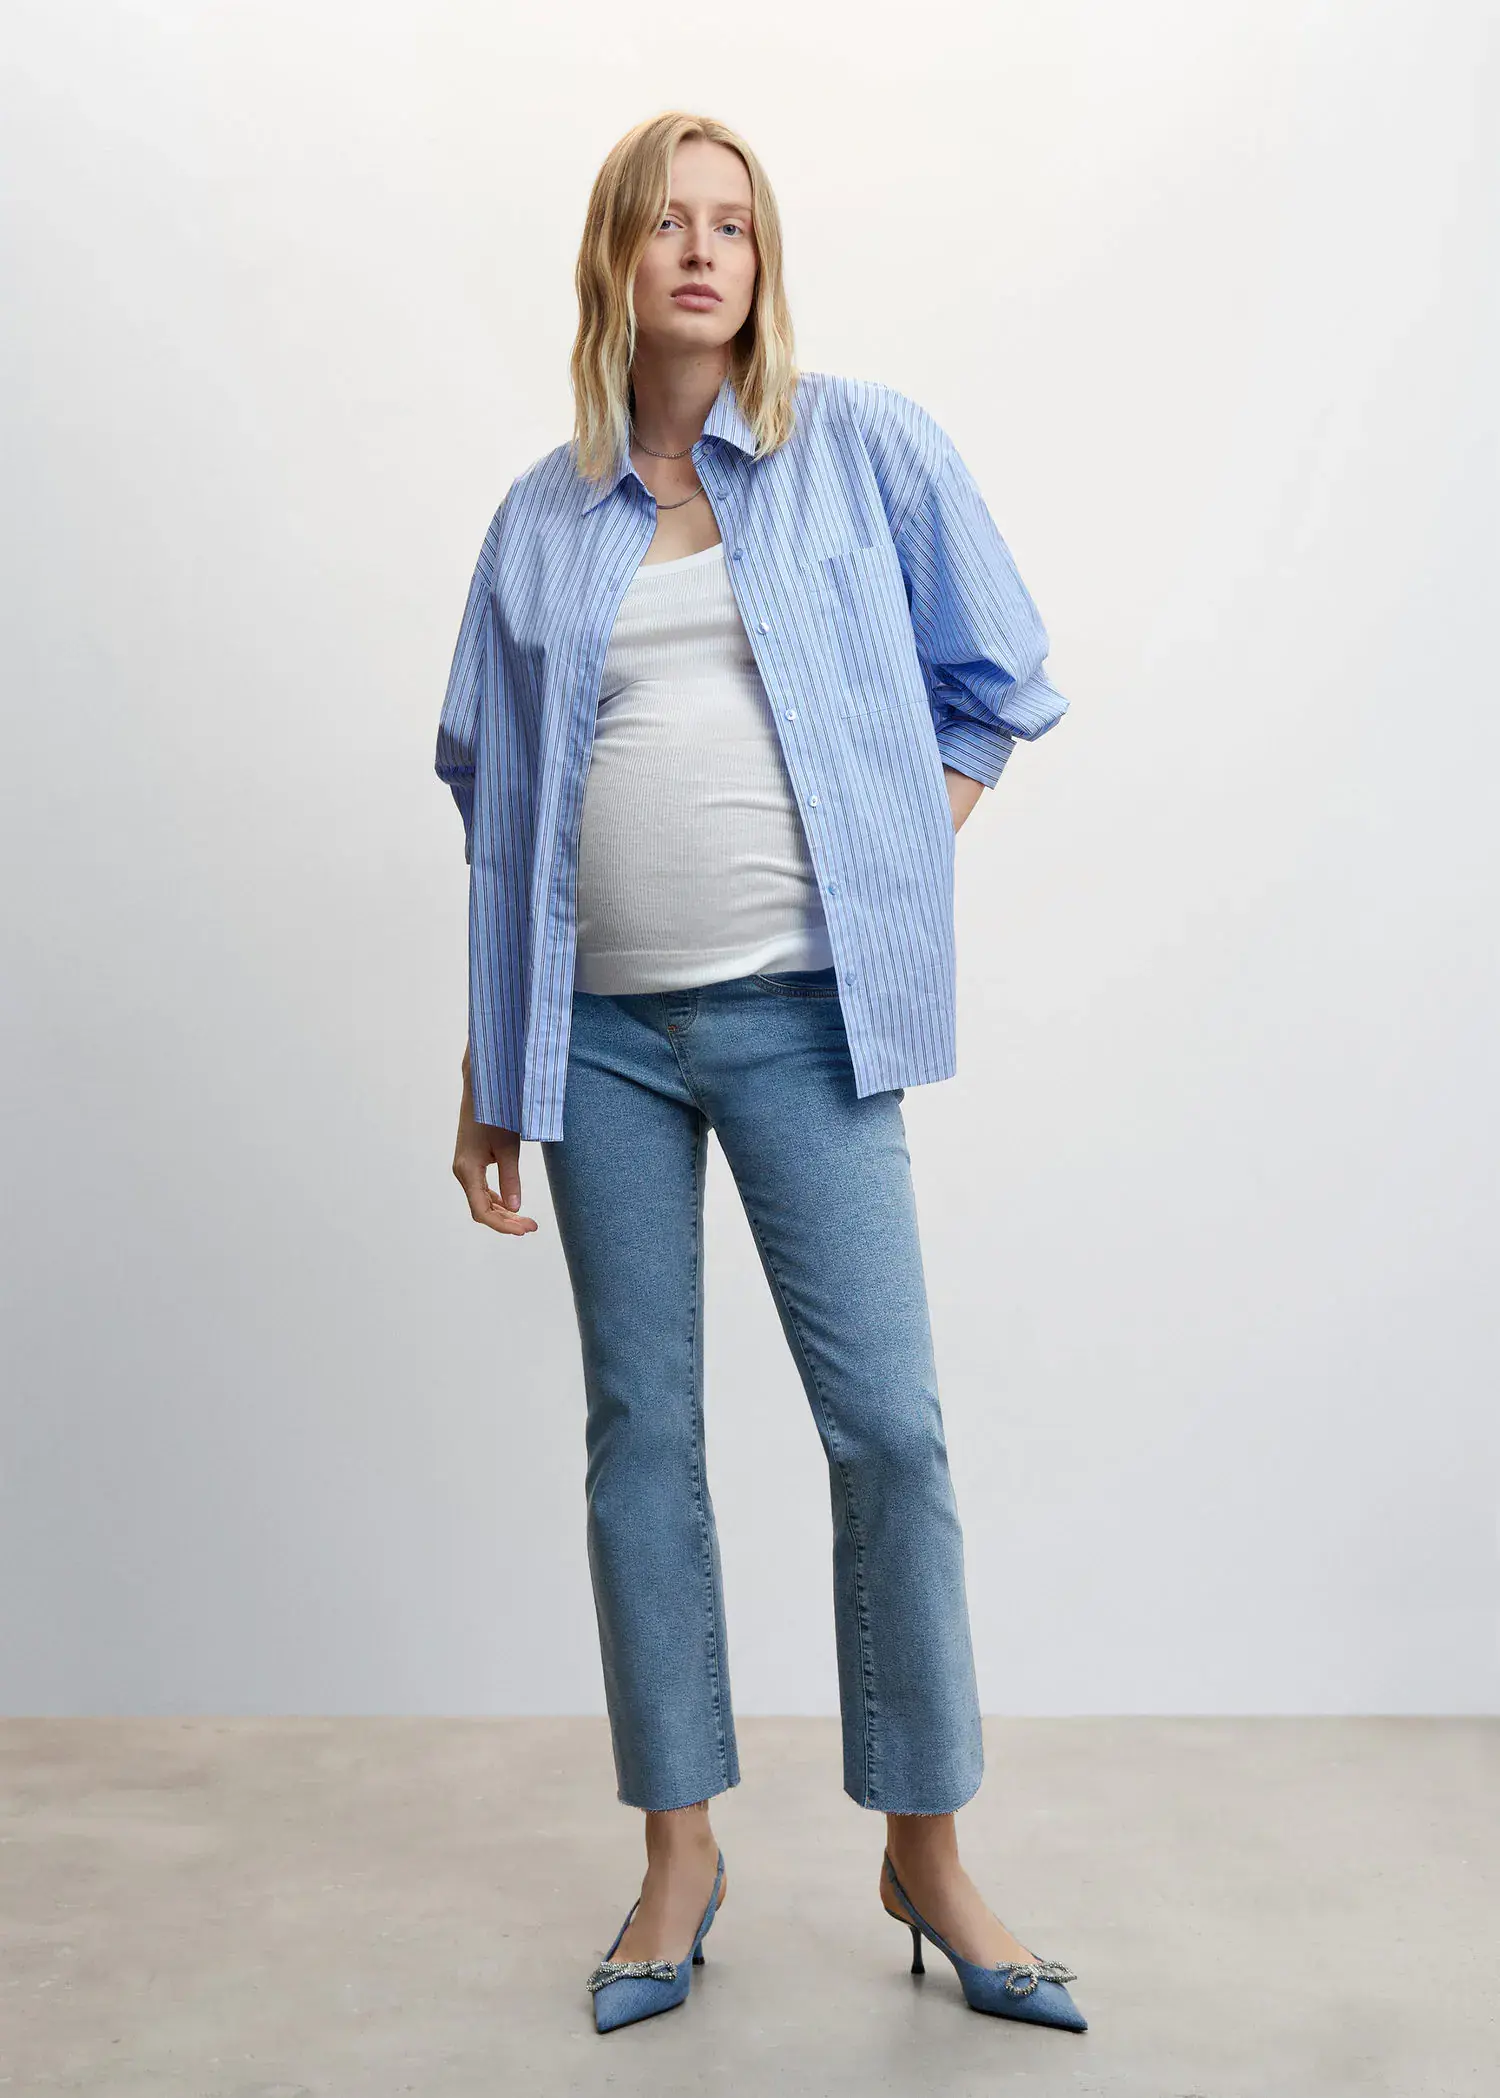 Mango Maternity flared cropped jeans. a pregnant woman wearing jeans and a blue shirt. 